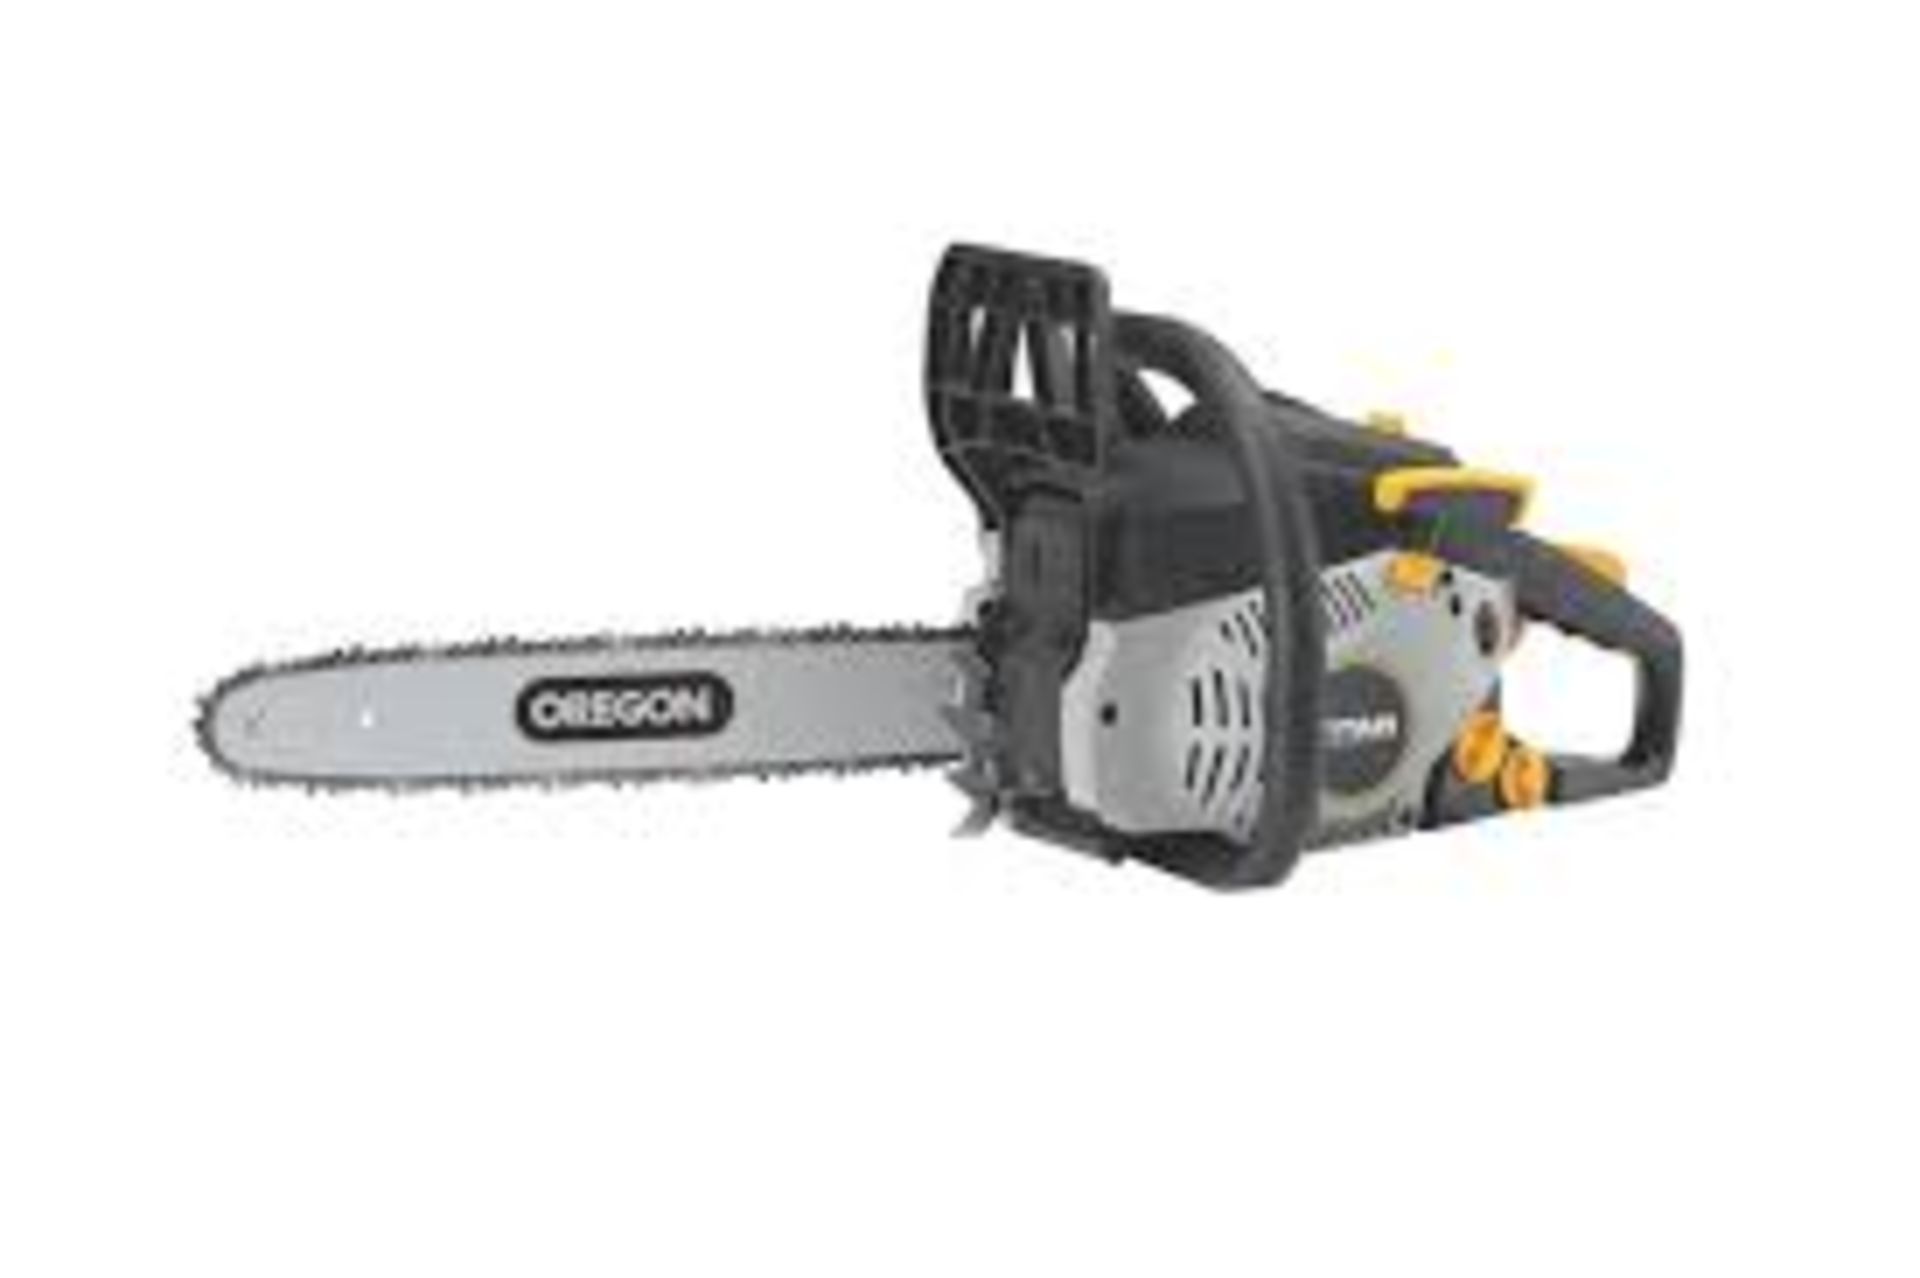 TITAN TTCSP40 40CM 40.1CC CHAINSAW. - S2. Lightweight and agile chainsaw designed for harvesting